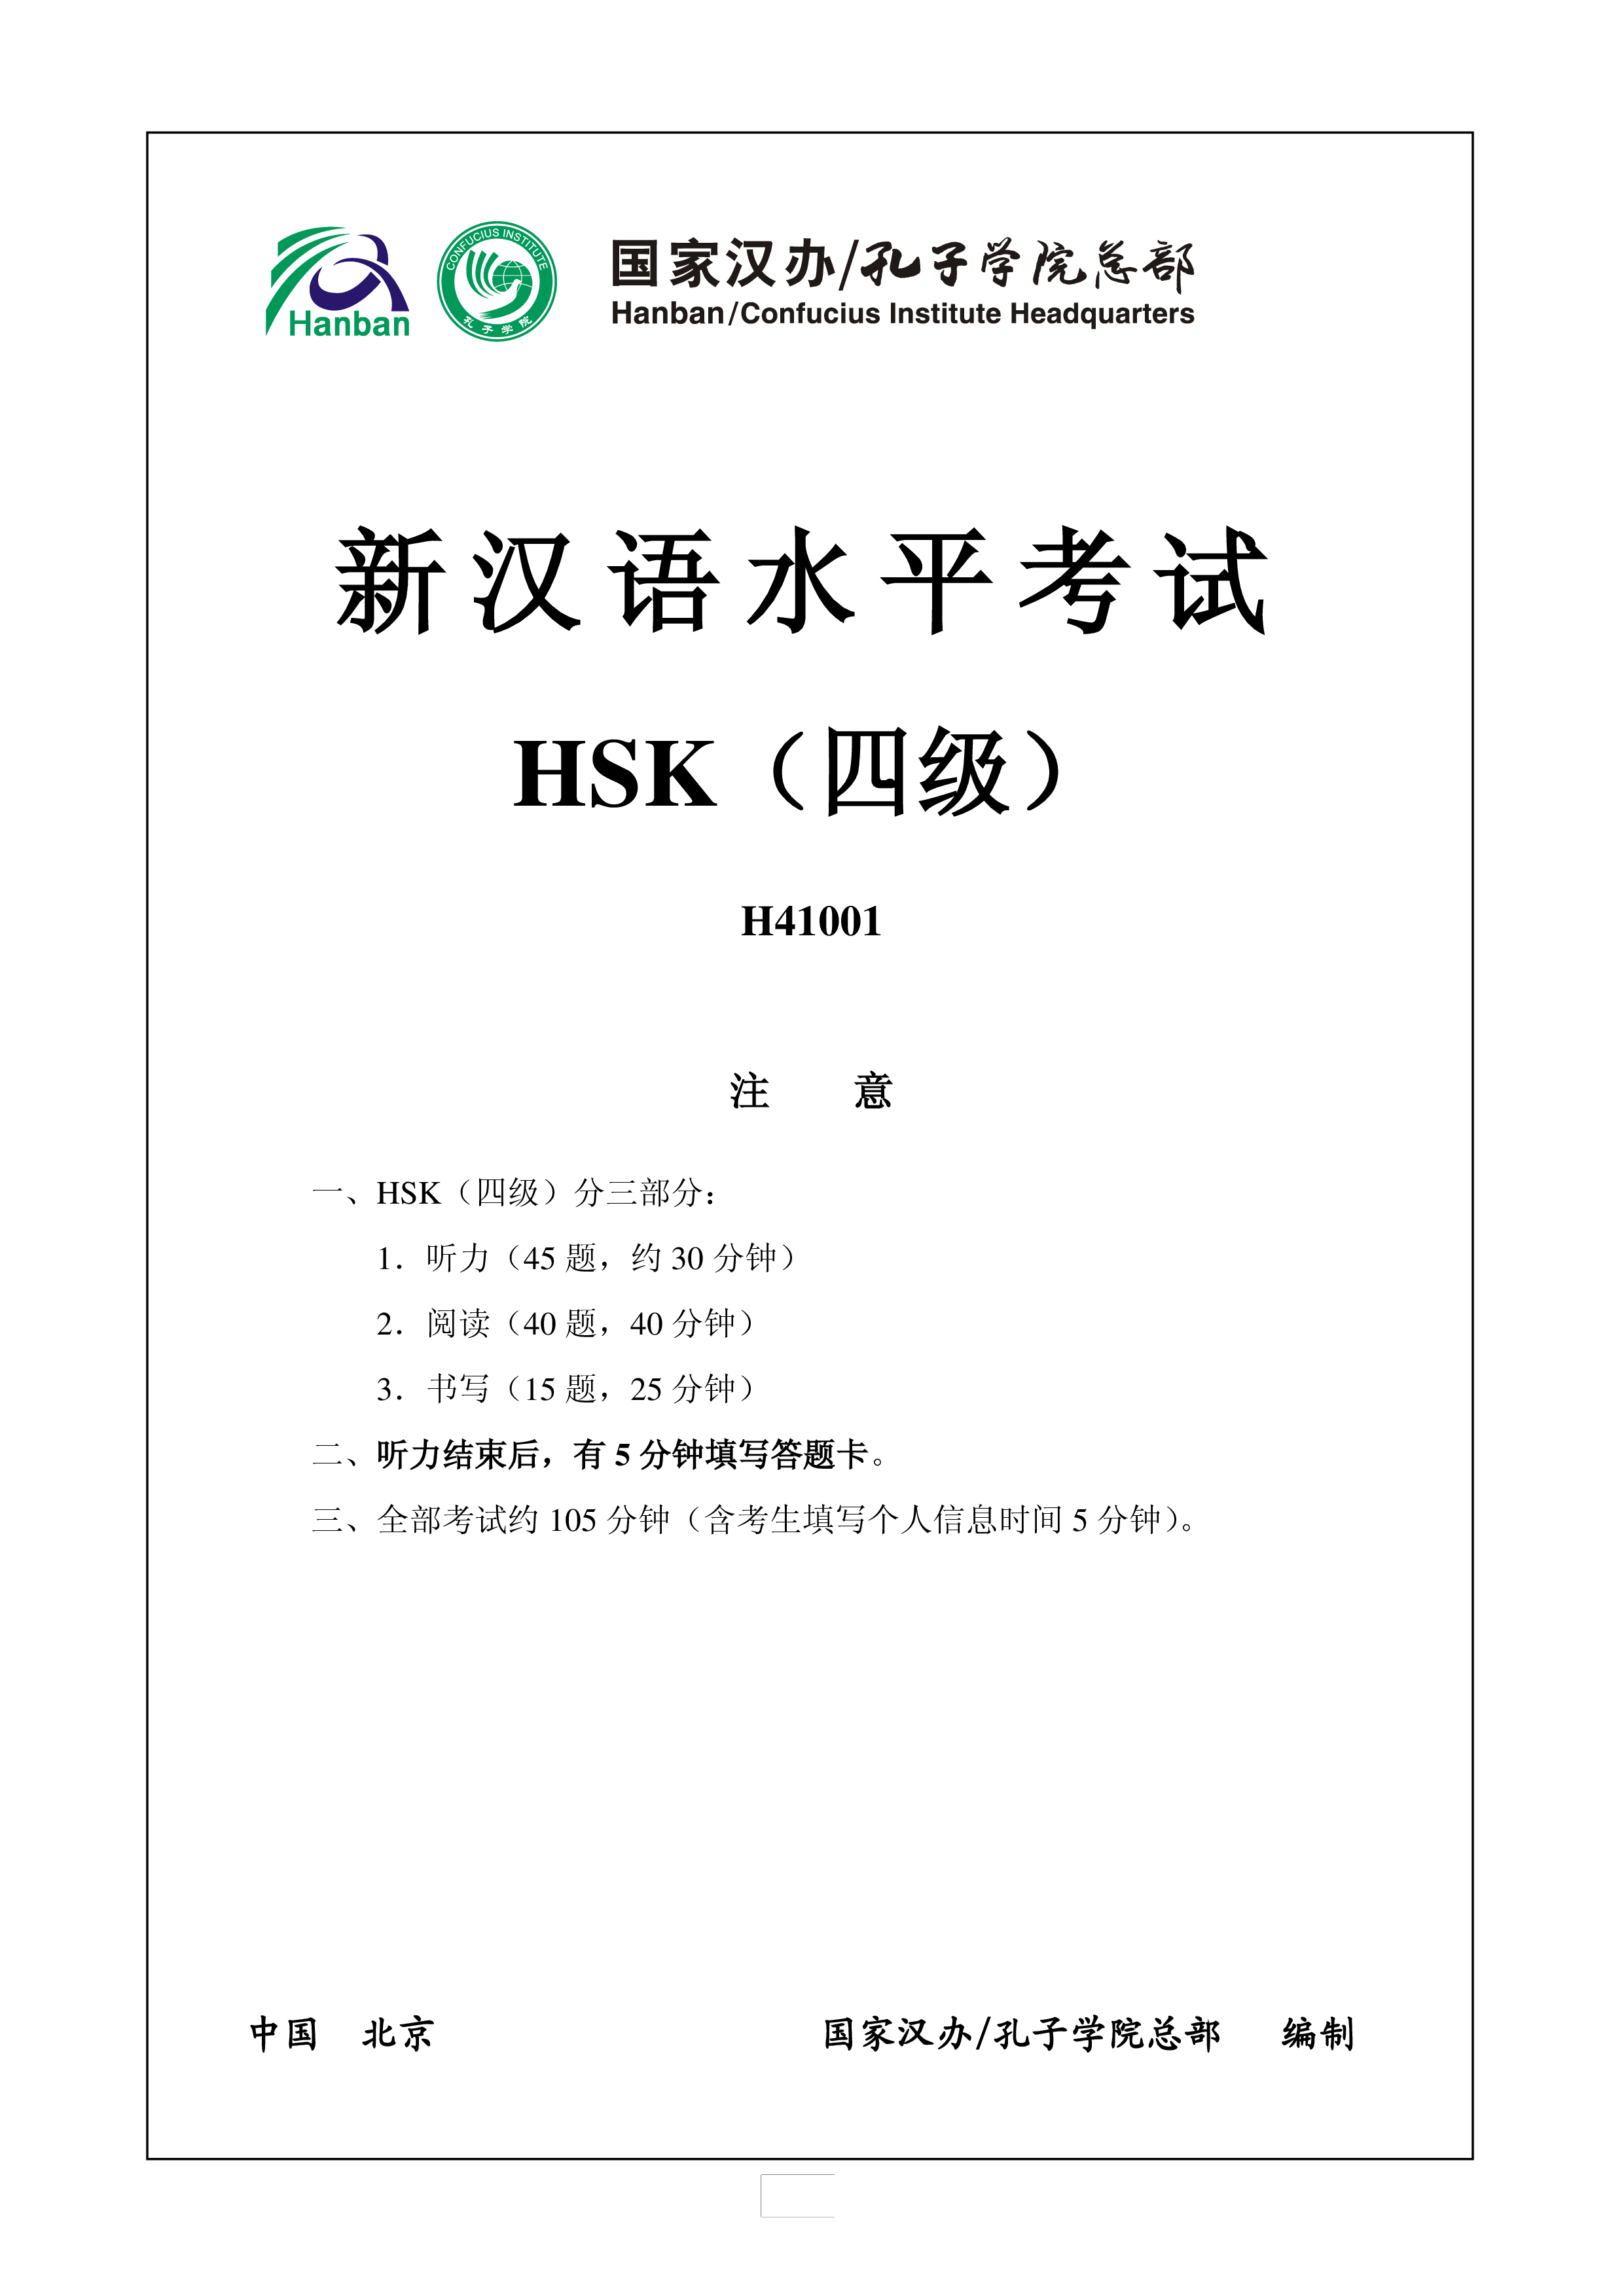 HSK4 Chinese Exam including Answers # HSK H41001 main image